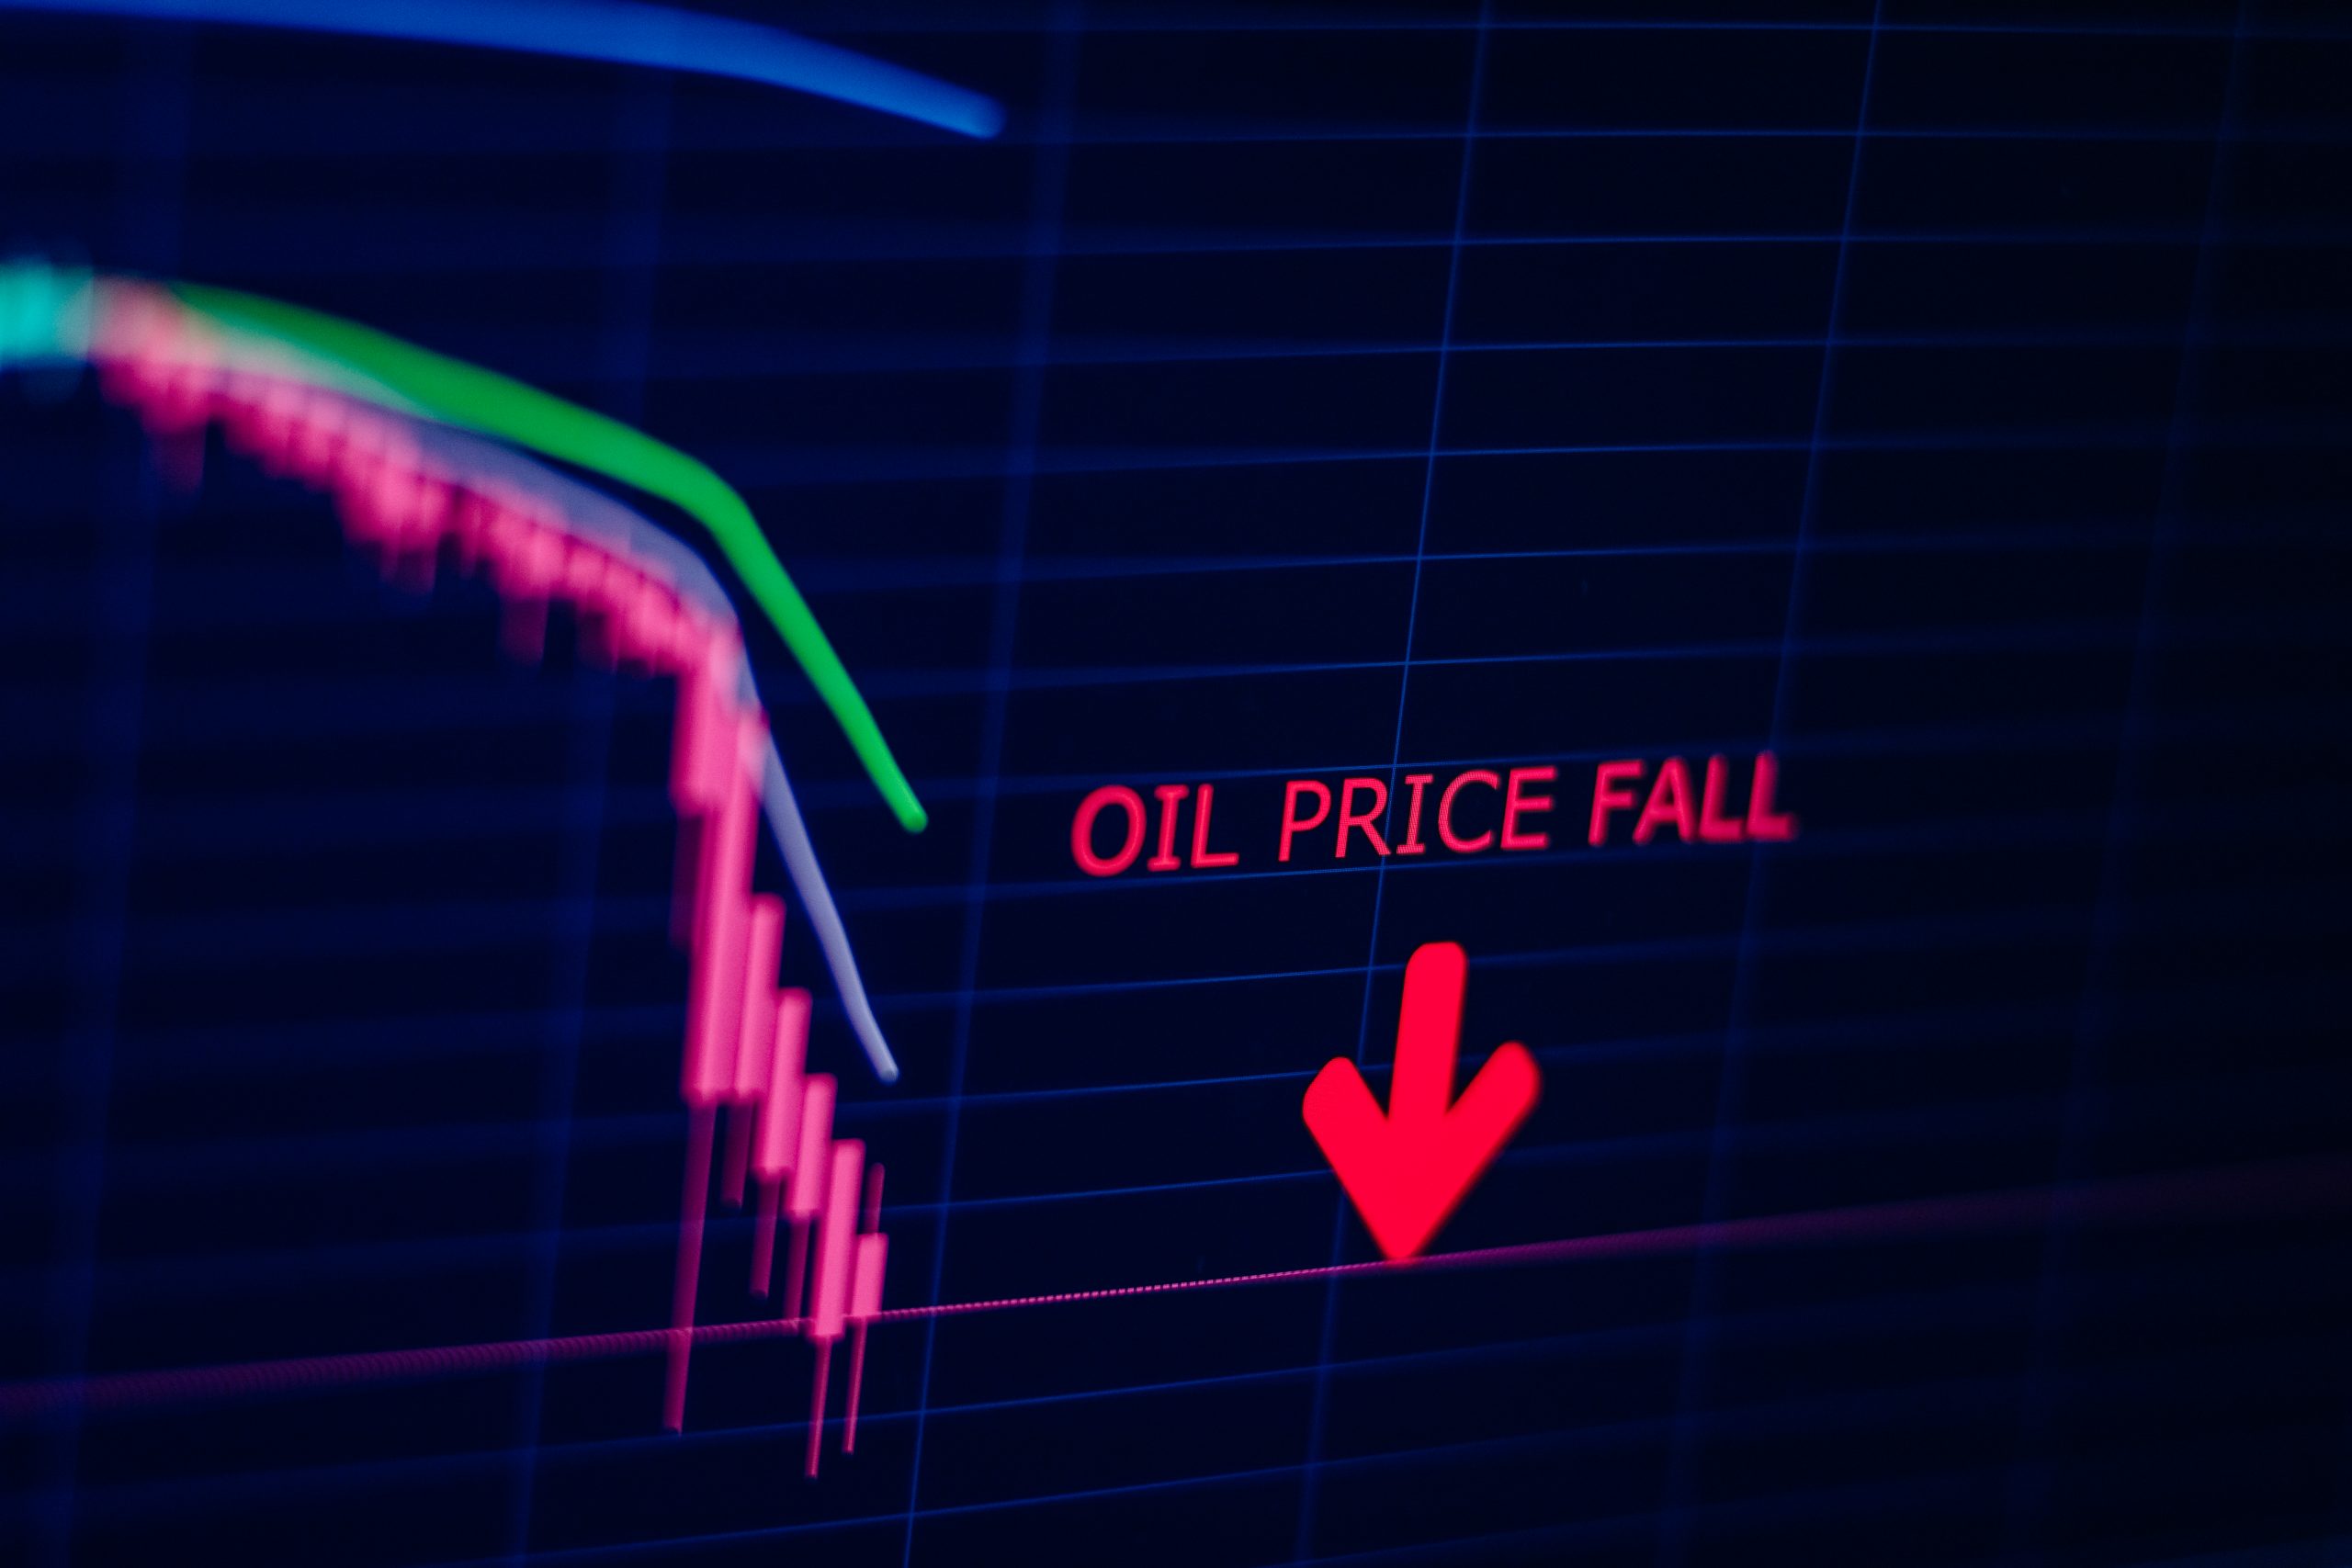 Oil Prices Slide Due to Fears of Oversupply, New COVID-19 Variant